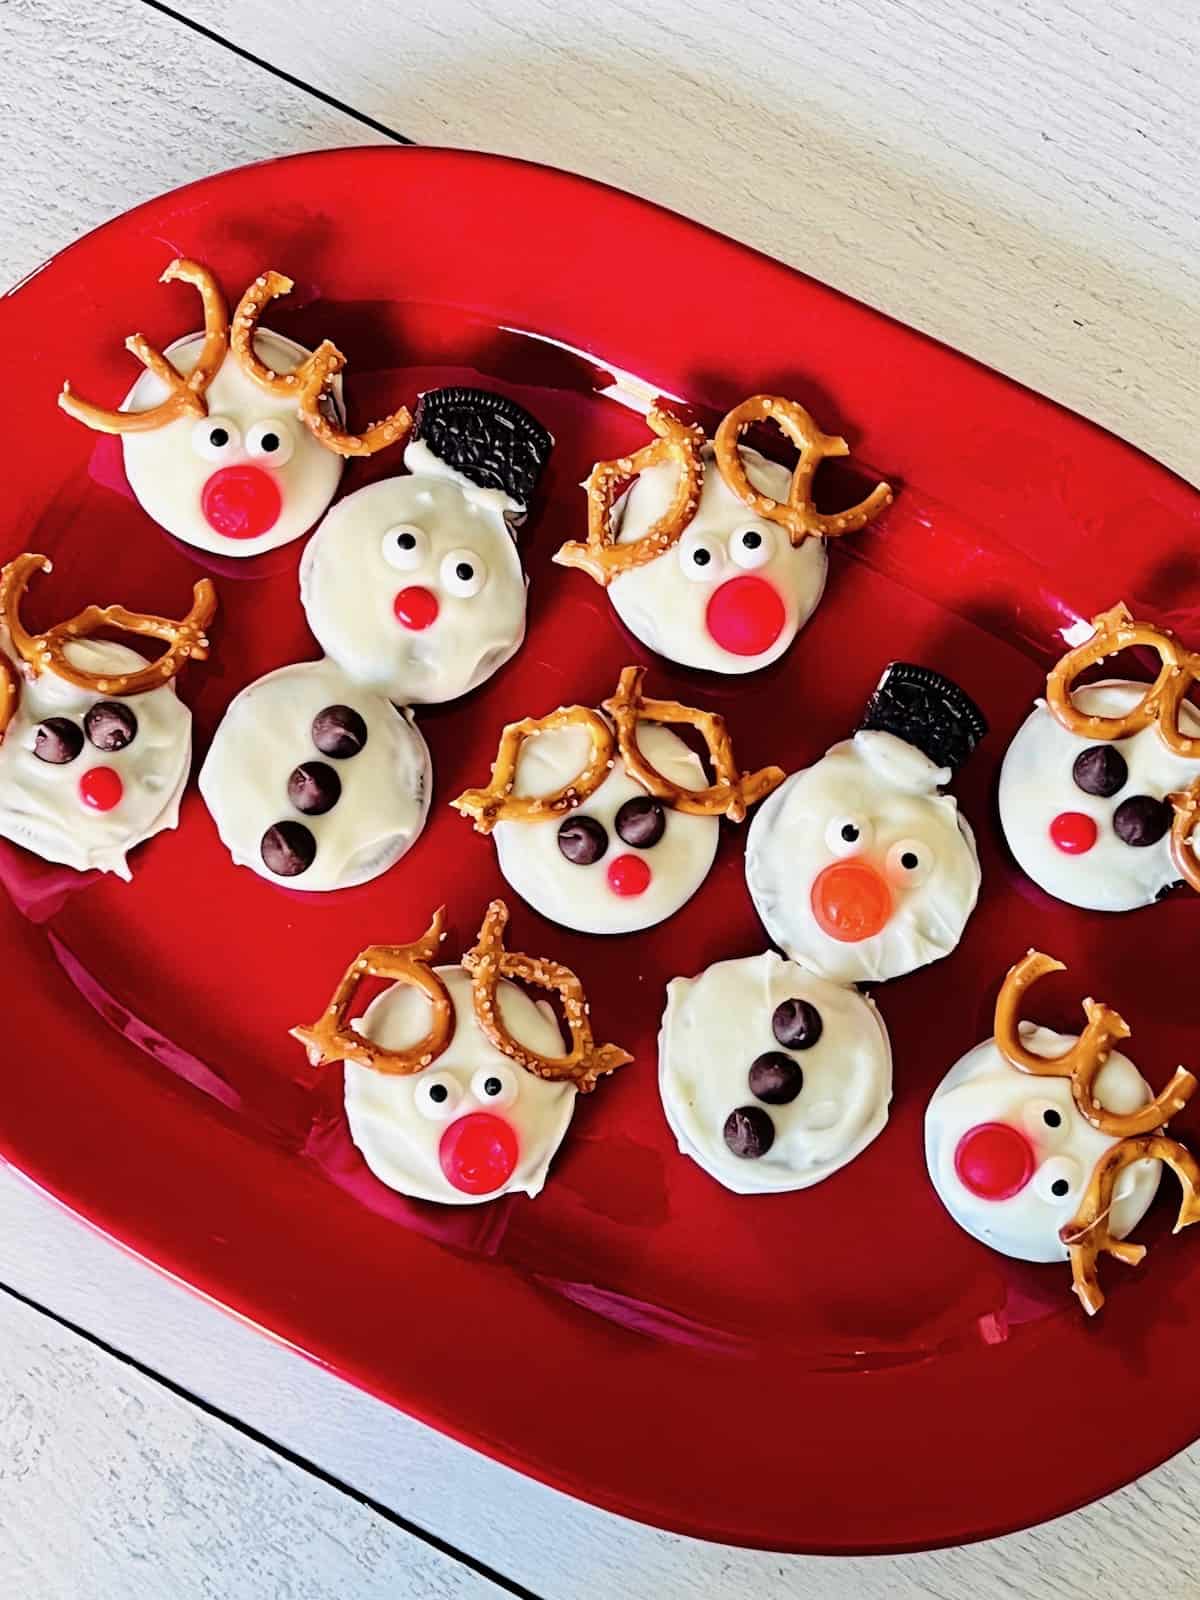 Oreo snowman & Rudolphy red-nosed reindeer cookies on a platter.